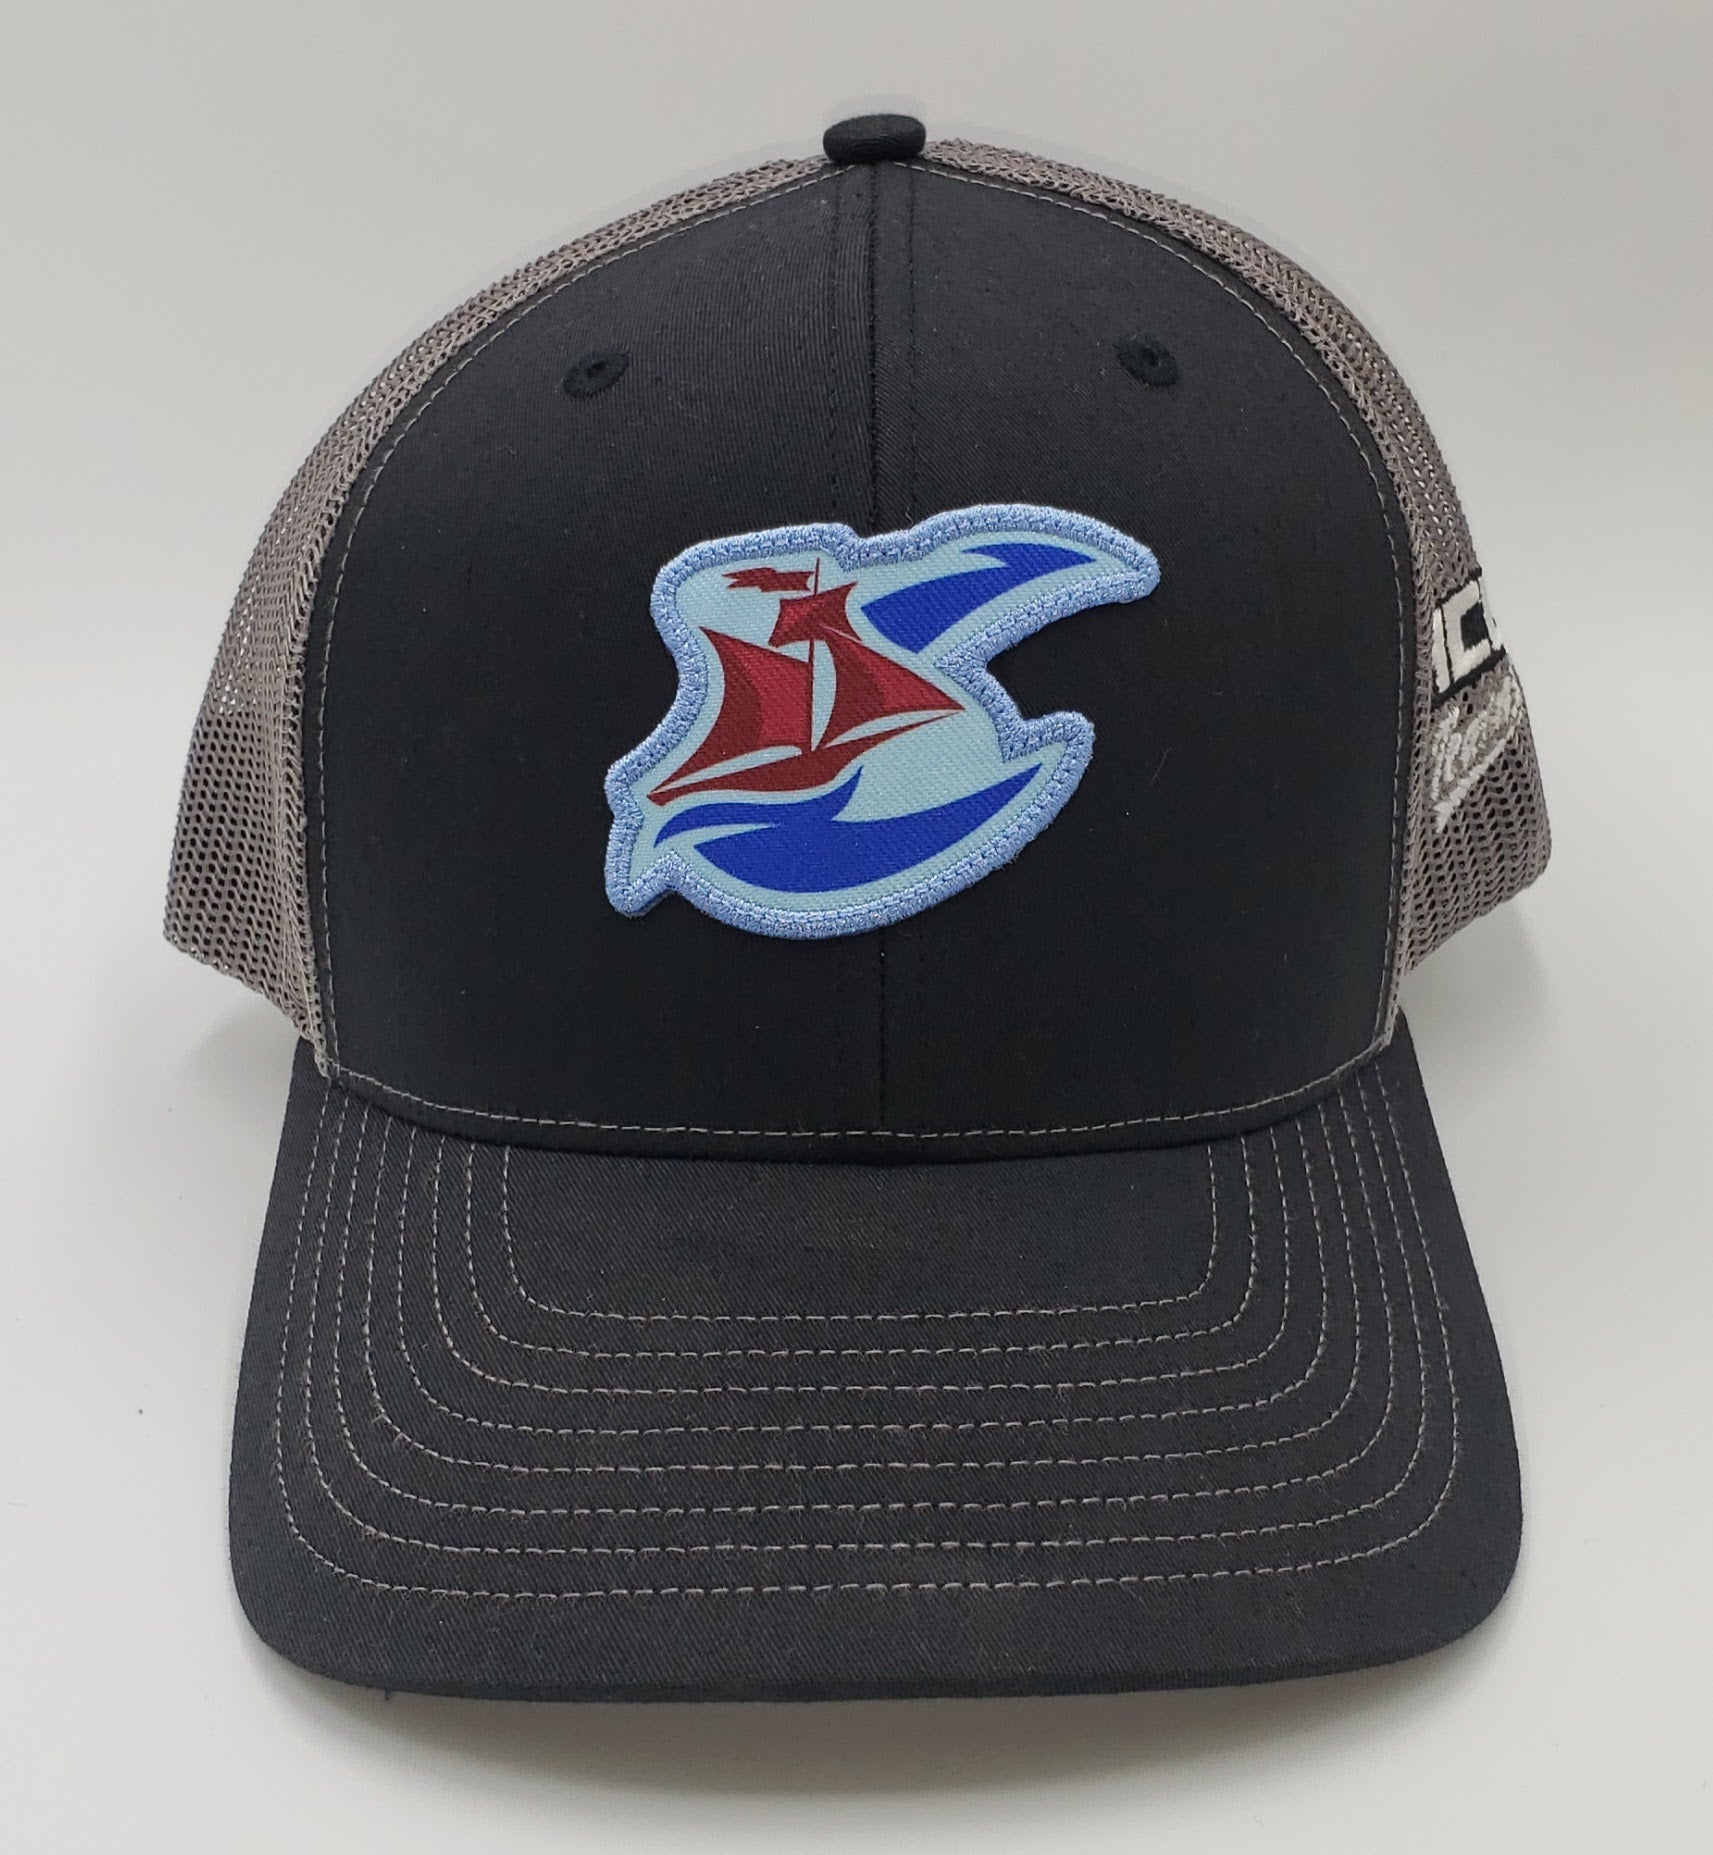 ACL Teams Hats - Virginia Cutters